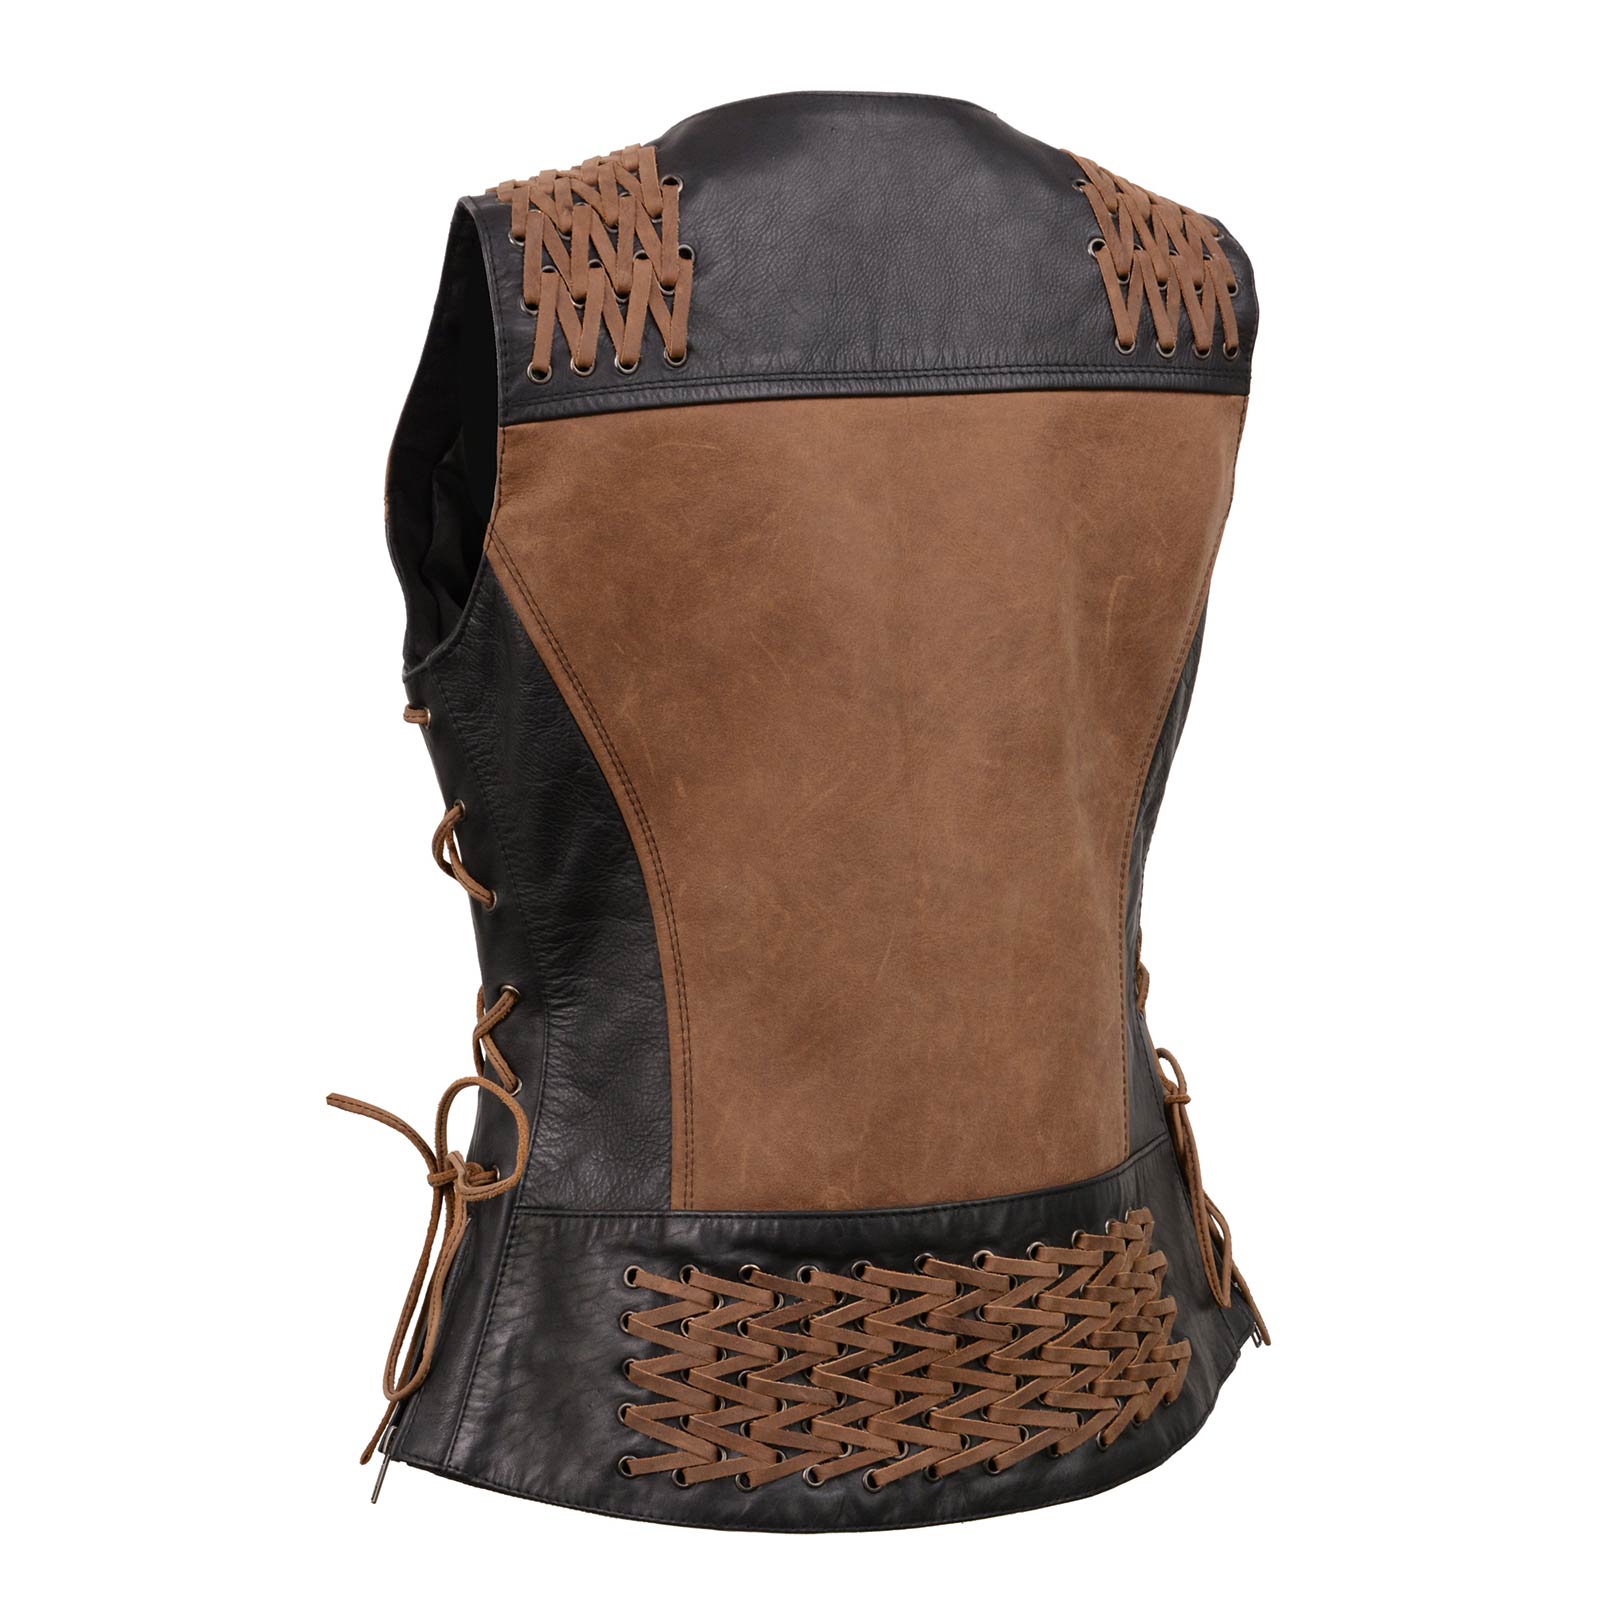 Milwaukee Leather MLL4509 Women's 'Smoocher' Vintage Two Tone Crazy Horse Brown and Black Leather Club Style Motorcycle Vest